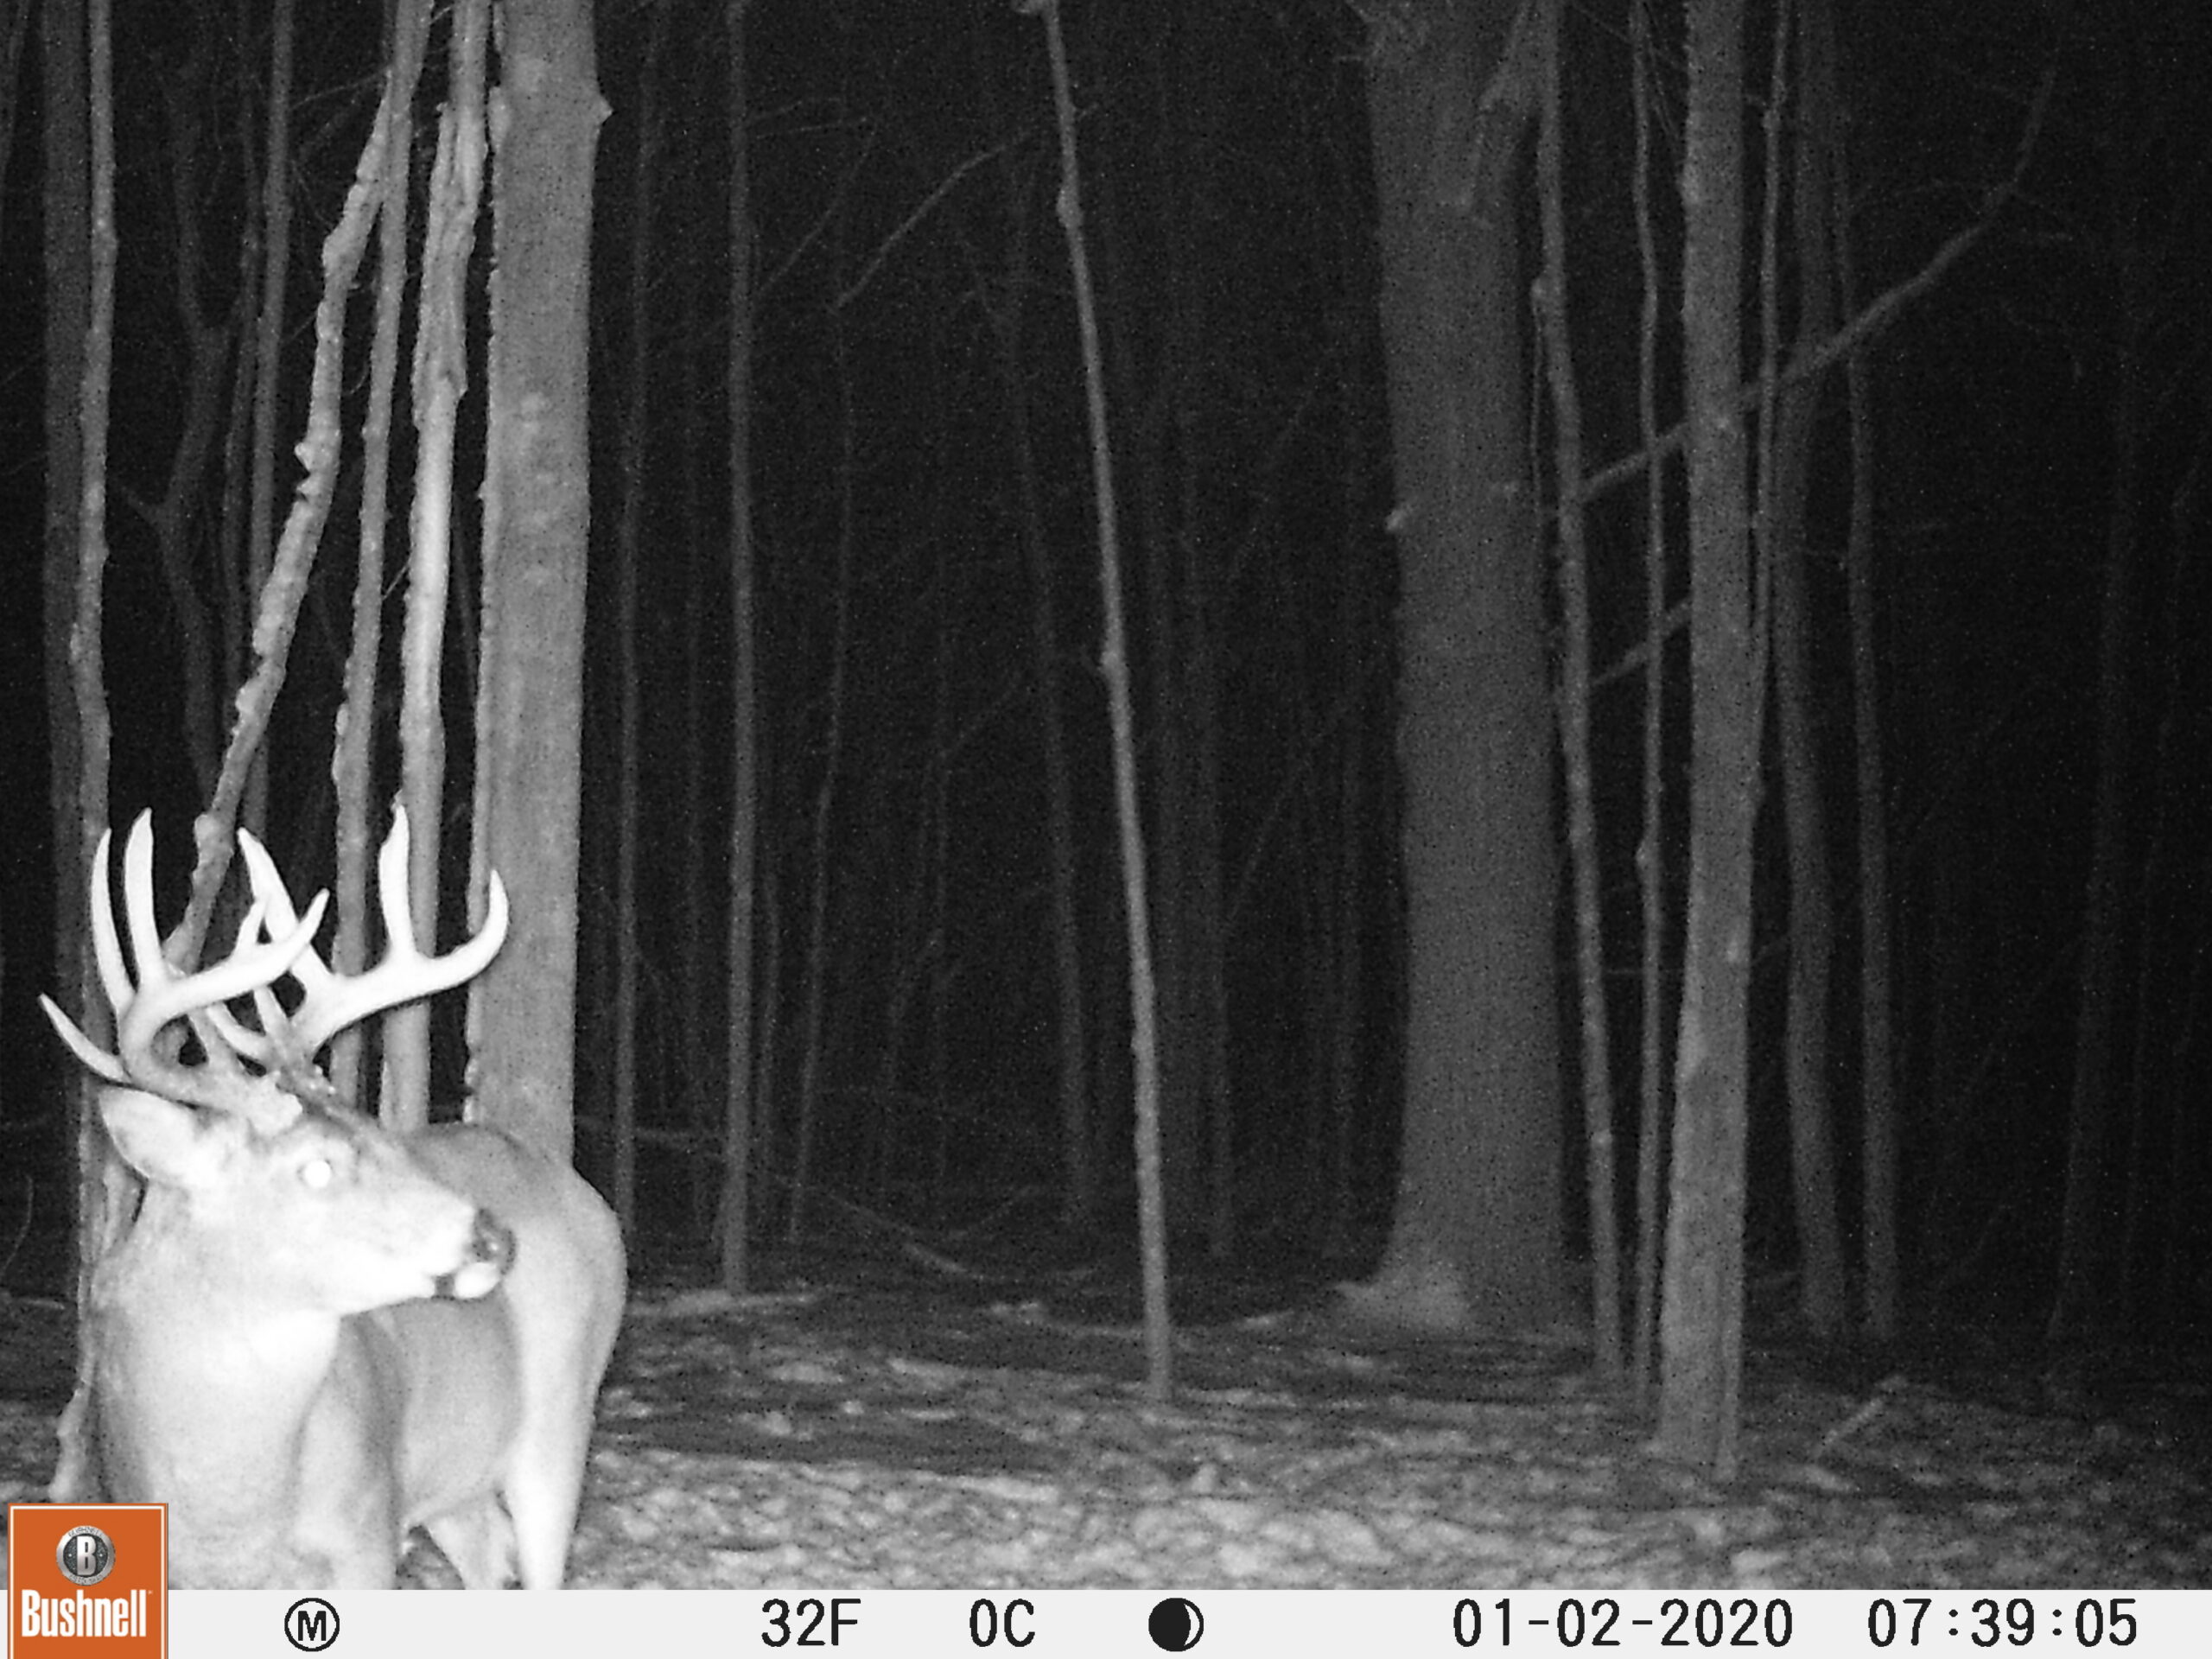 A snowy nighttime Bushnell trail camera photo of a whitetail buck in the woods.